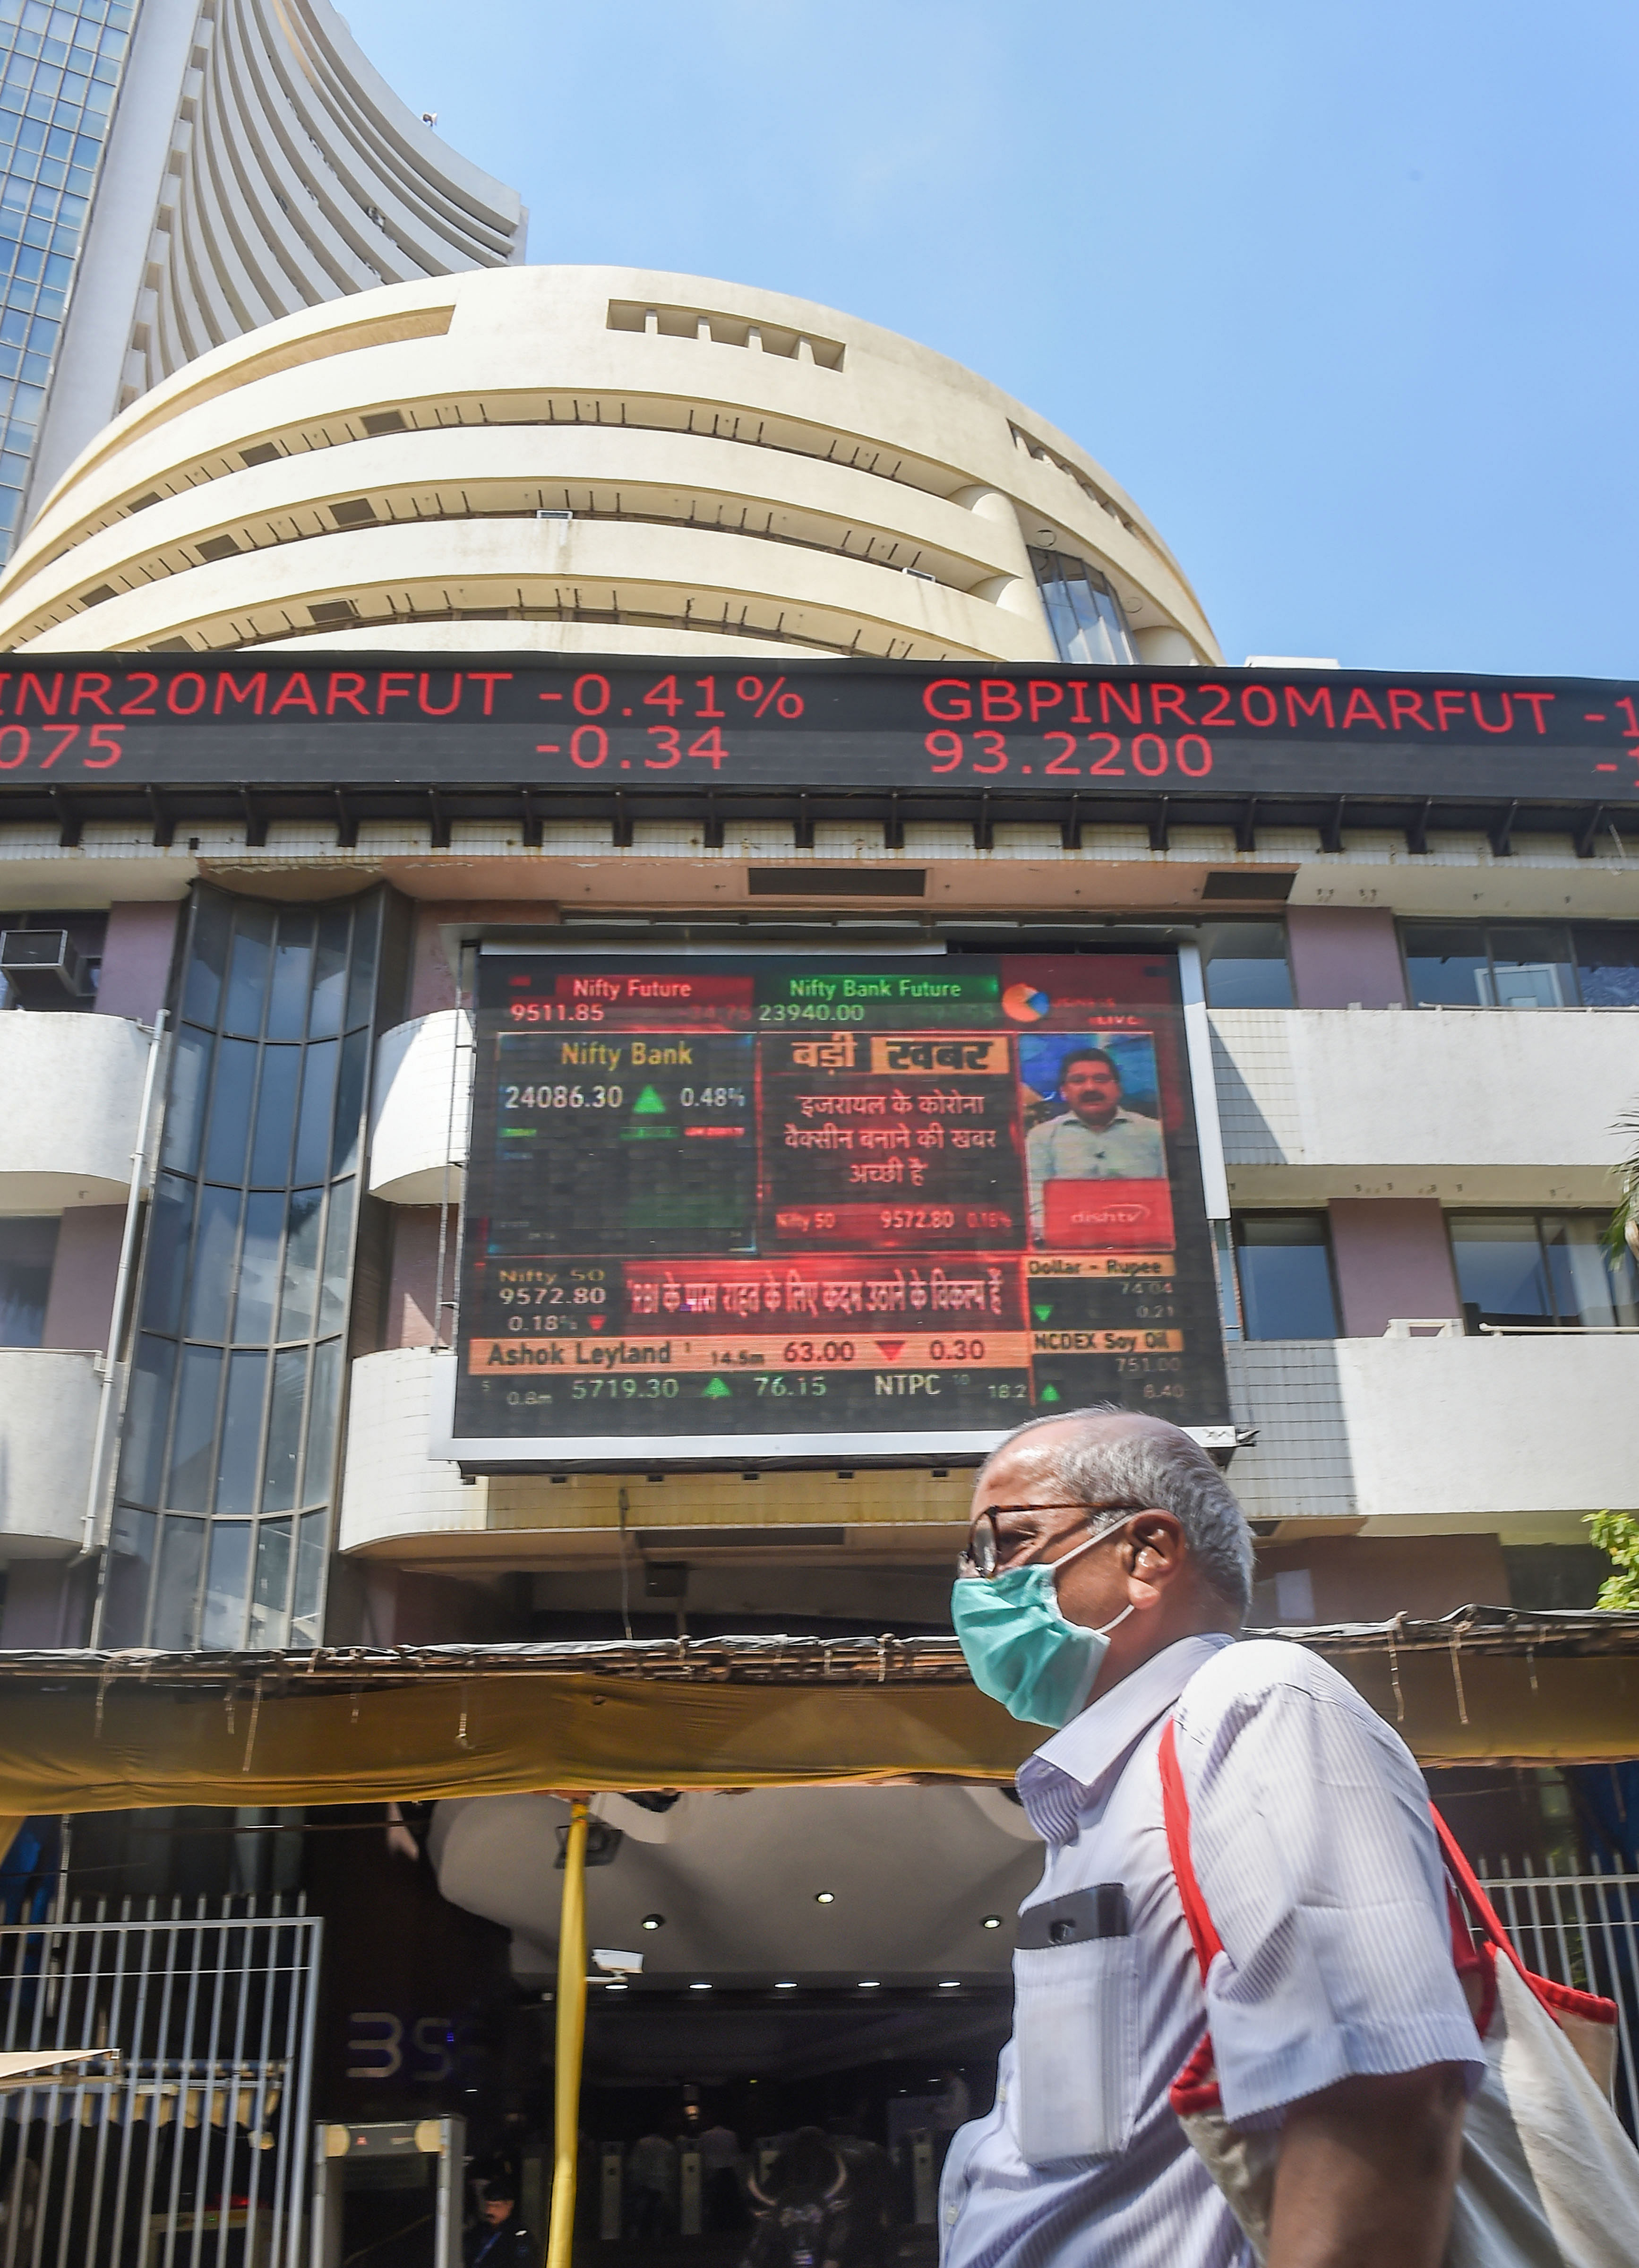  A man wears a mask and walks past the BSE building, as the Sensex crashed by nearly 3000 points, in Mumbai. (PTI Photo)